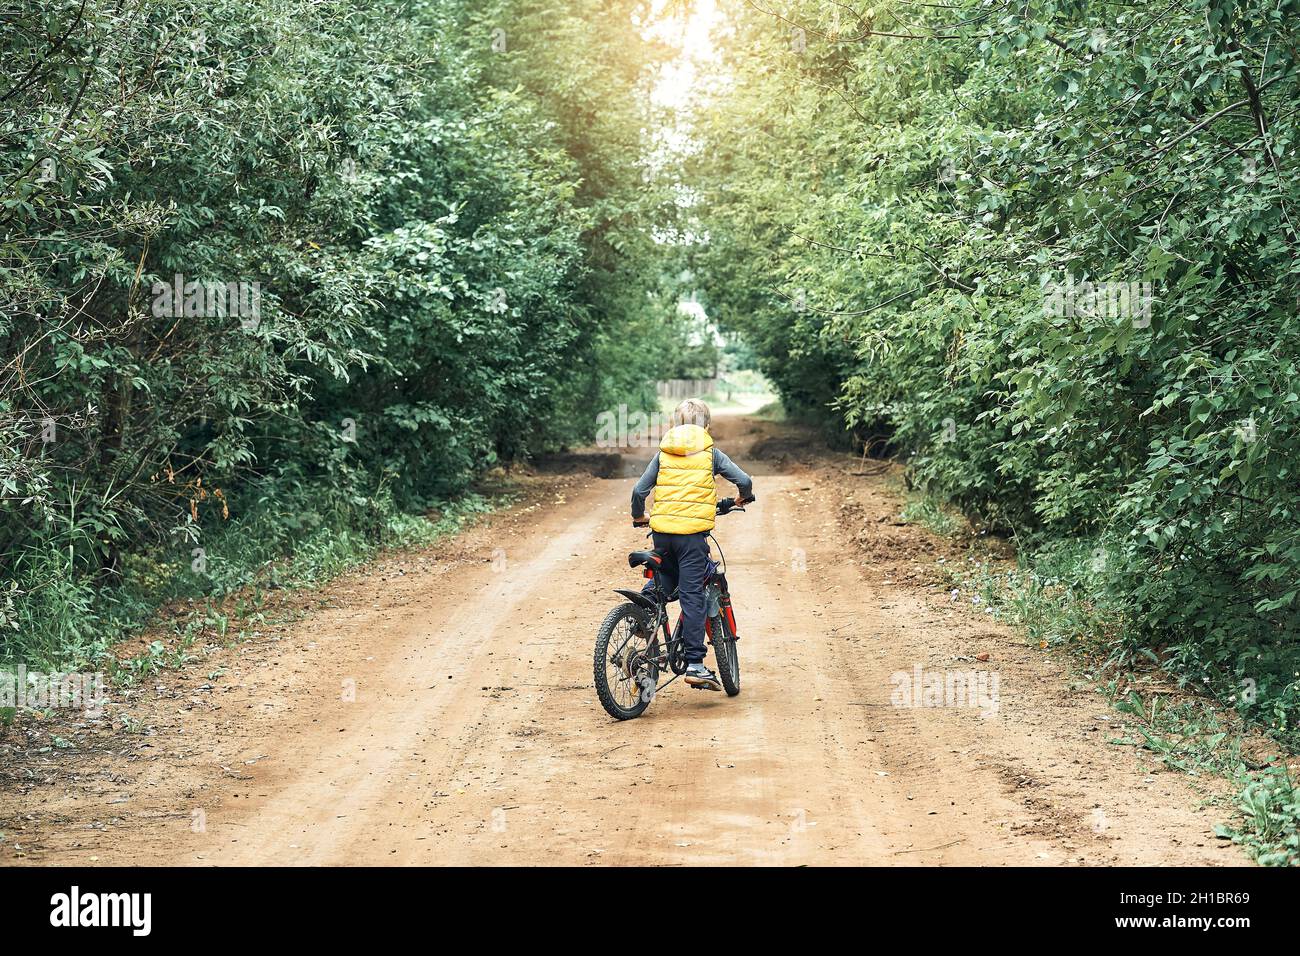 Little boy in yellow vest rides on modern bicycle on rural ground road with green trees on sides in summer Stock Photo